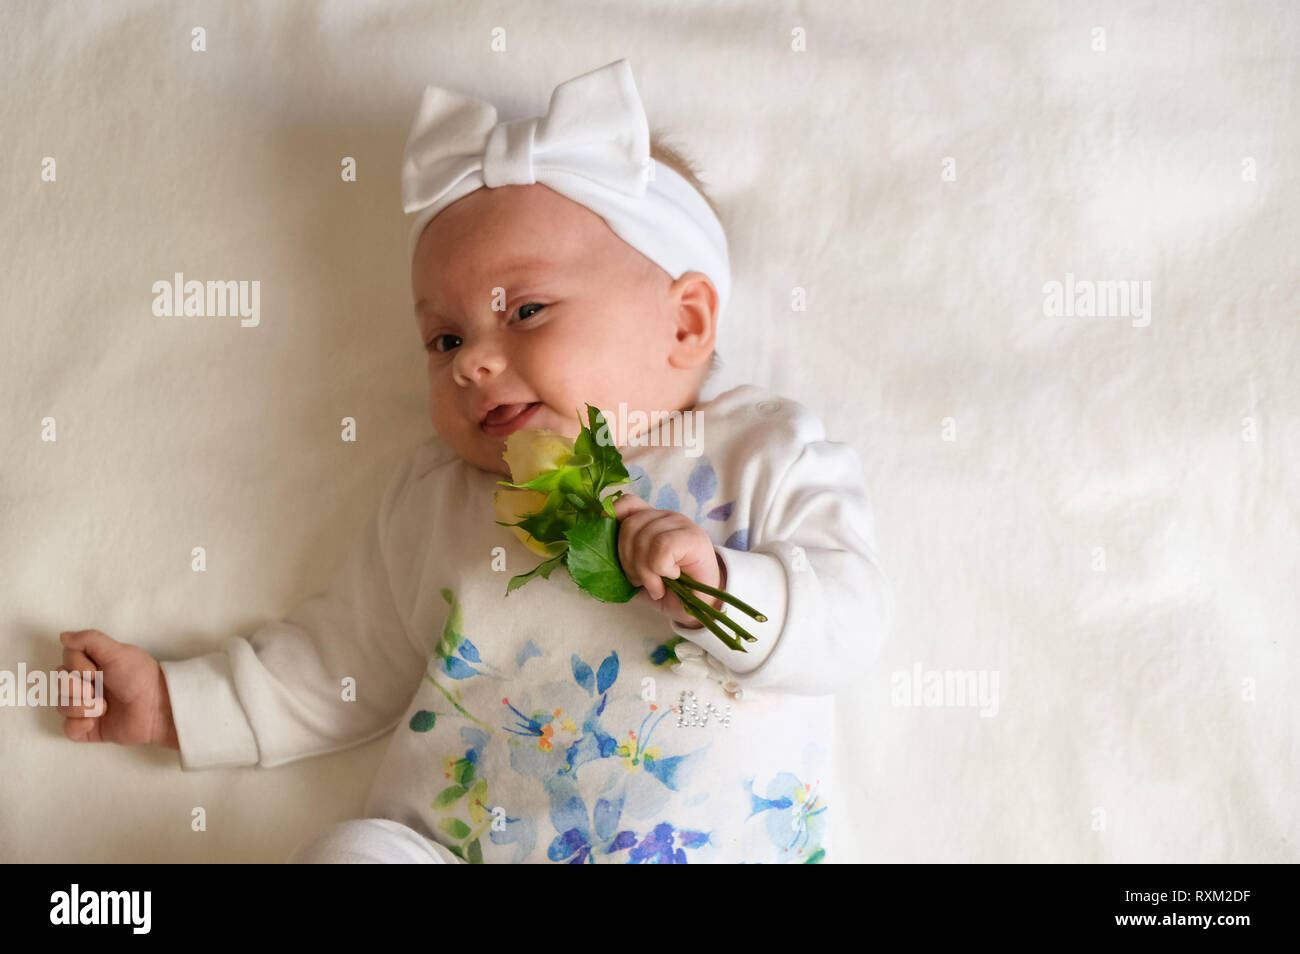 Beautiful baby girl holding a flower on white blanket Stock Photo